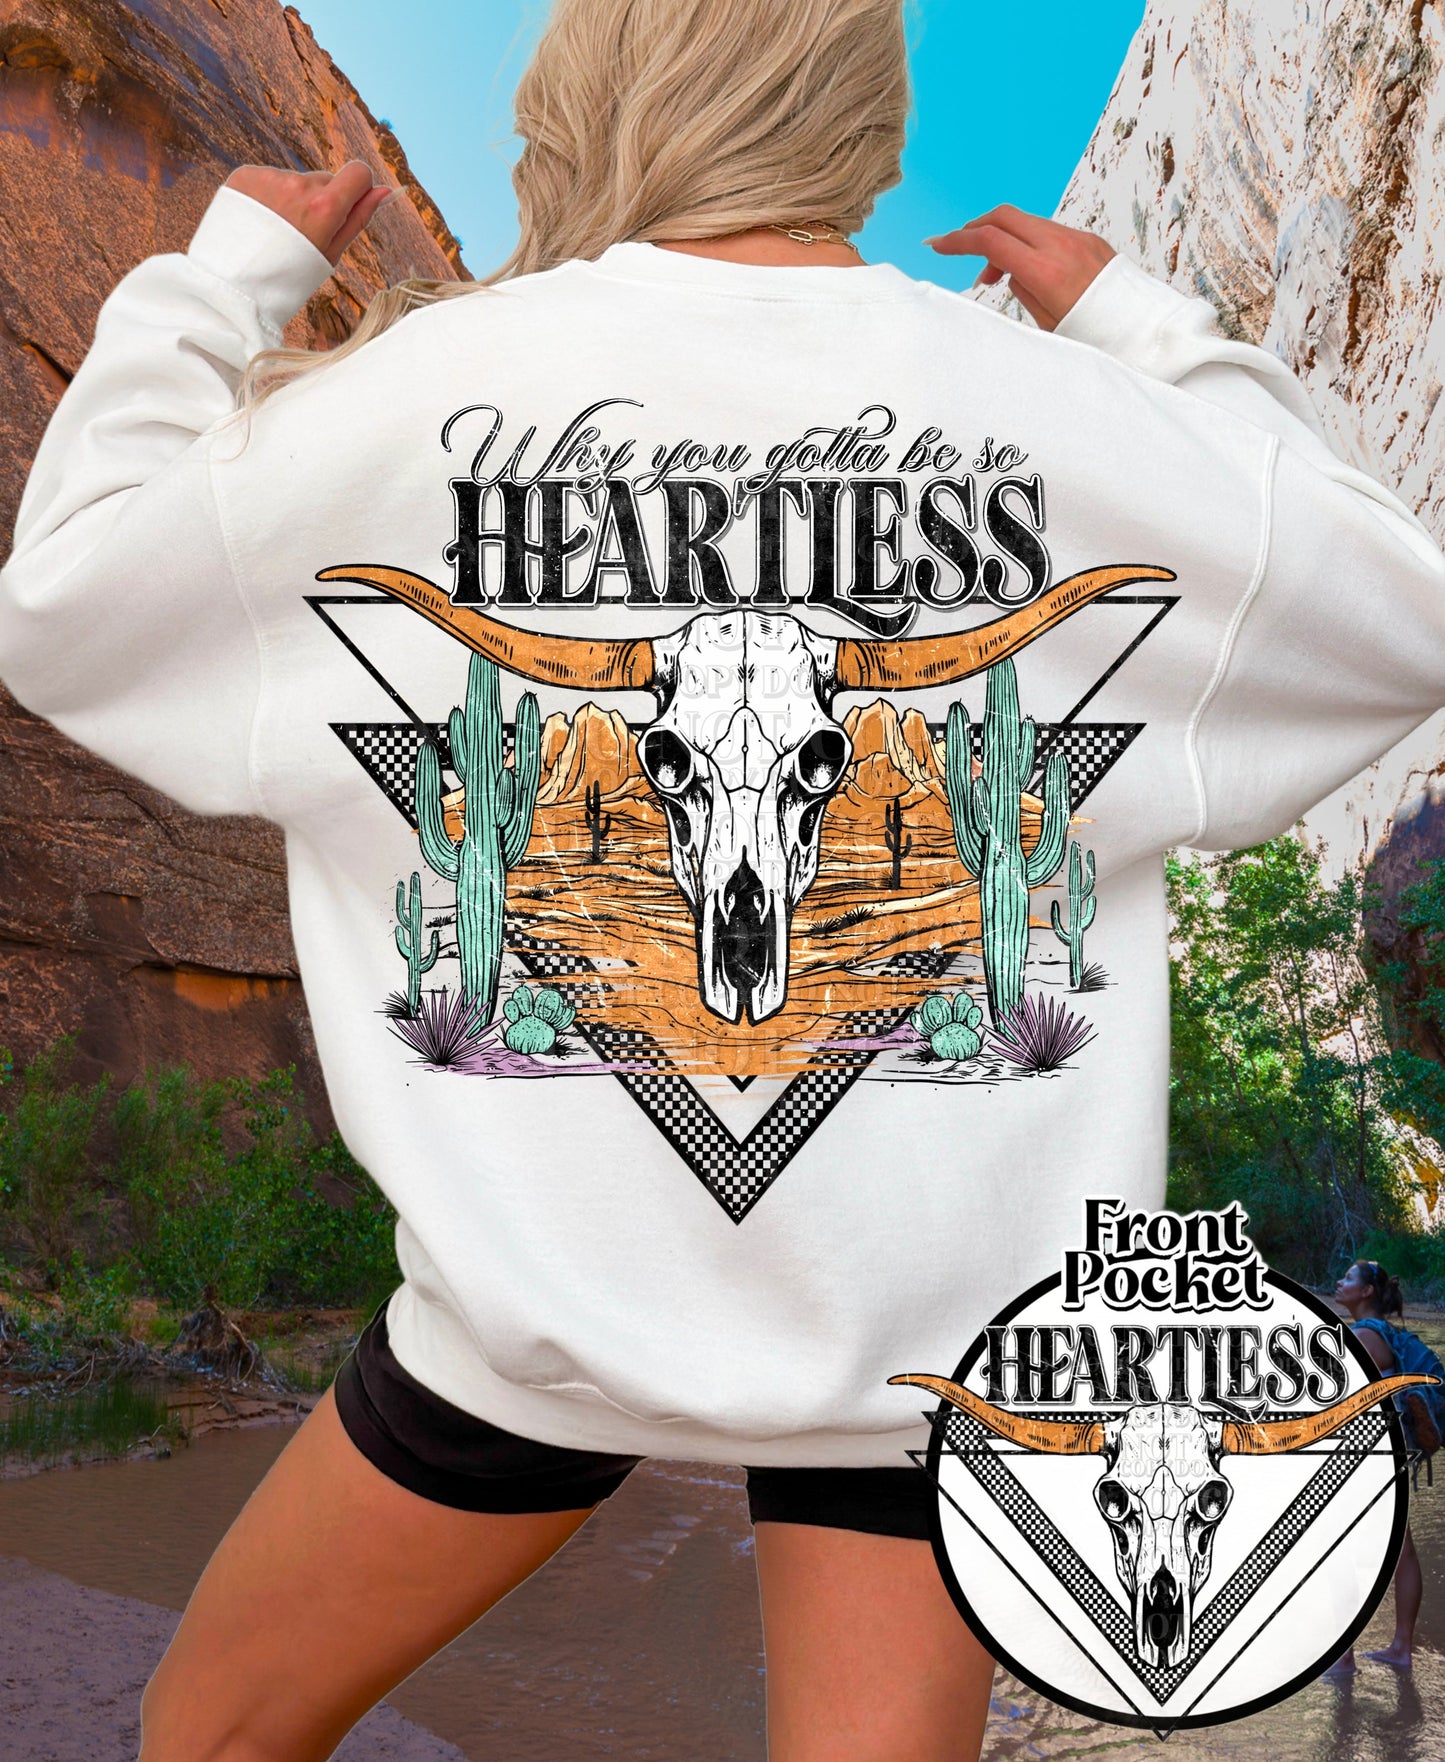 Country Rustic T-Shirt Sweatshirt - Heartless Wallen Print - Perfect for Any Occasion